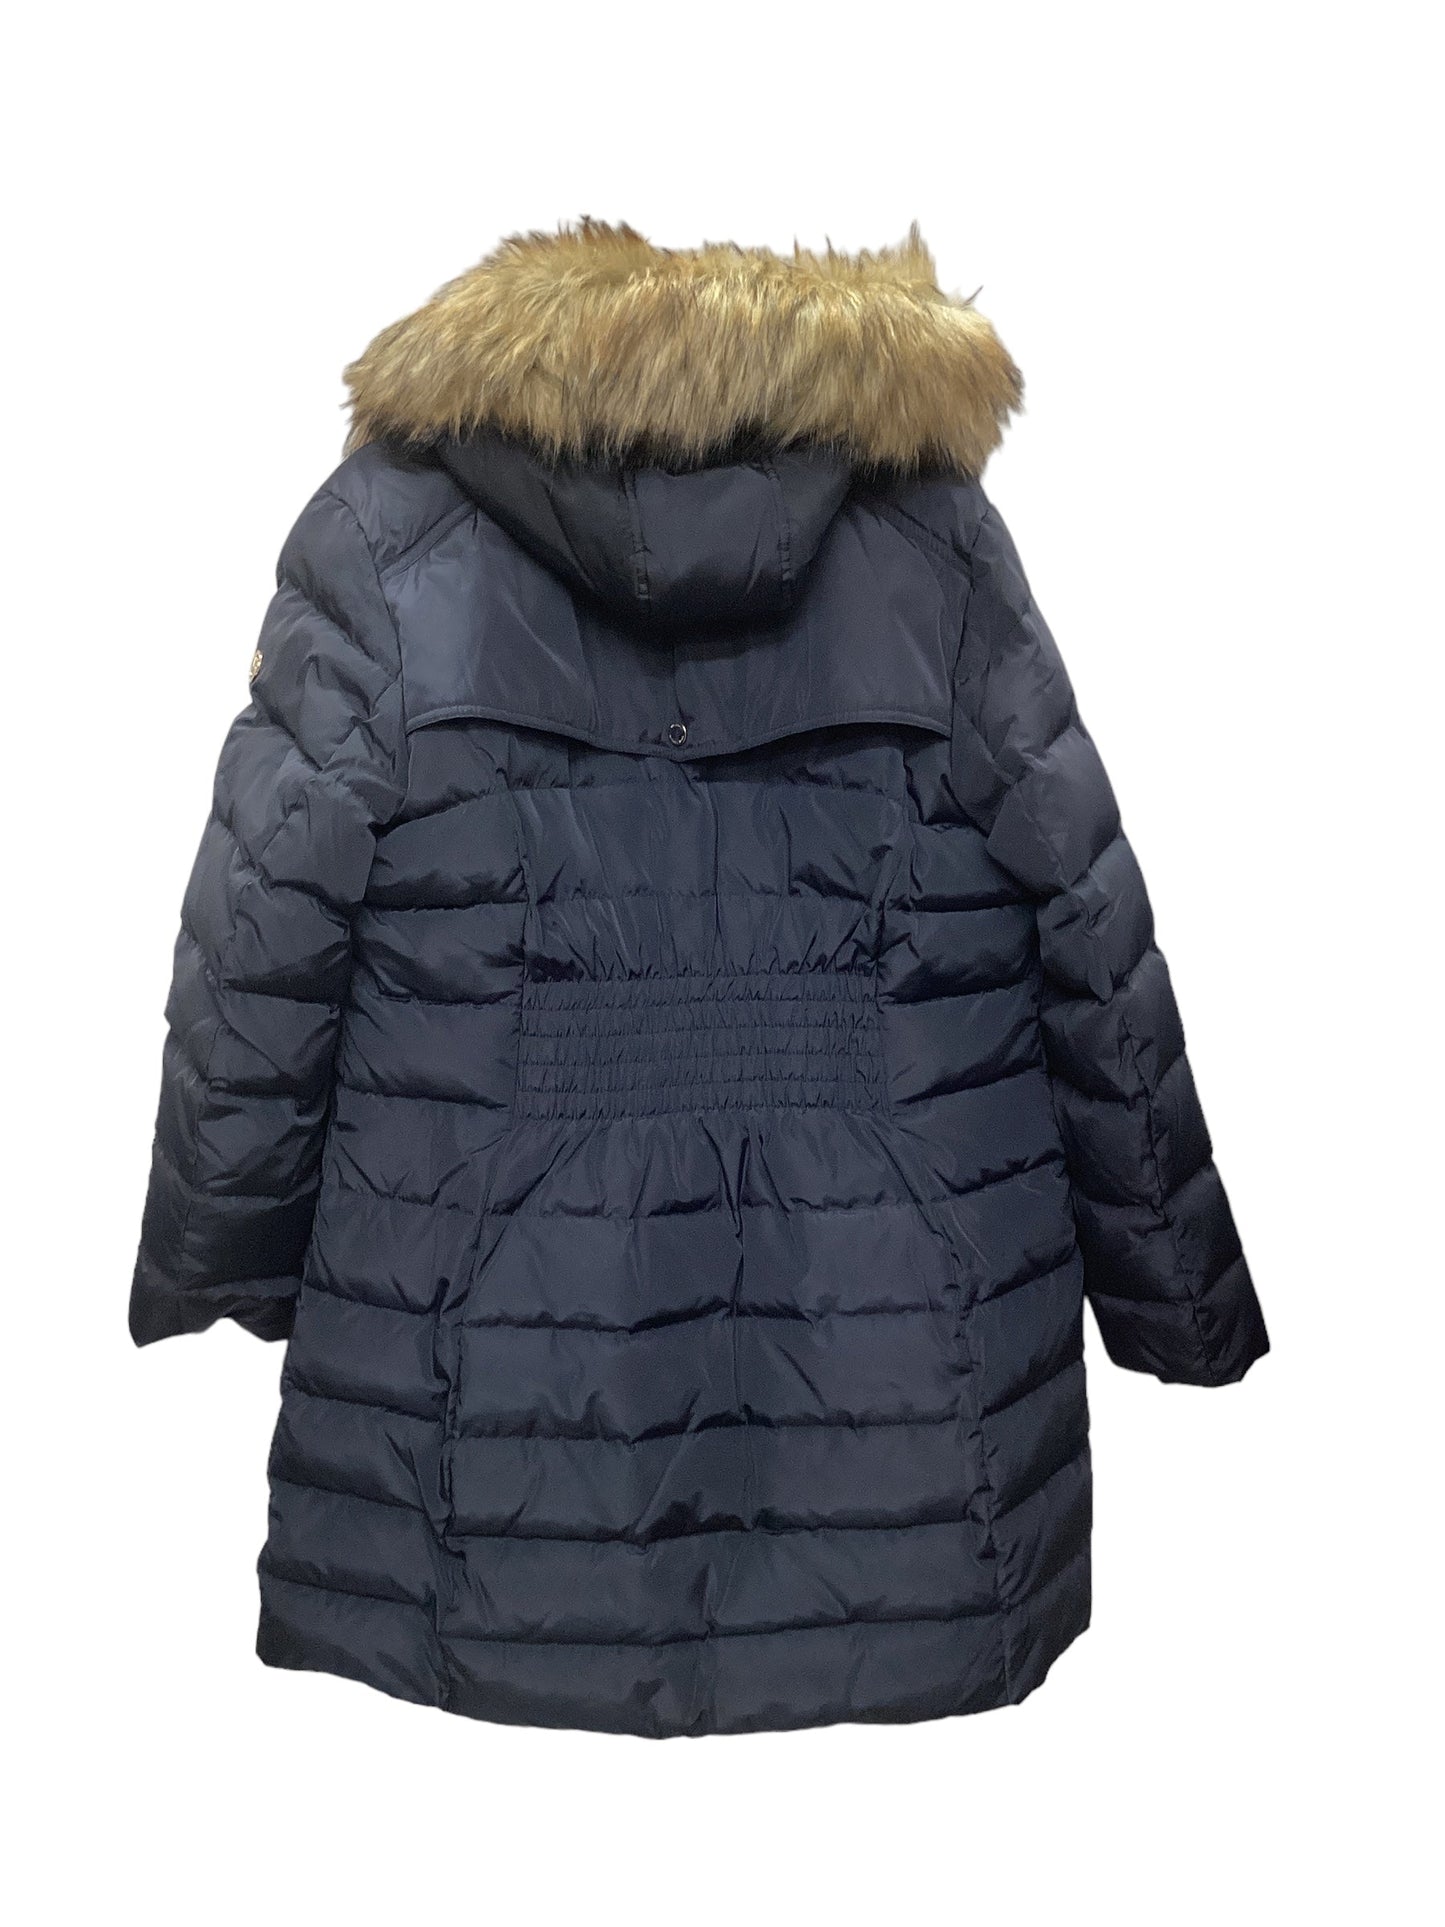 Navy Coat Puffer & Quilted Michael By Michael Kors, Size Xl